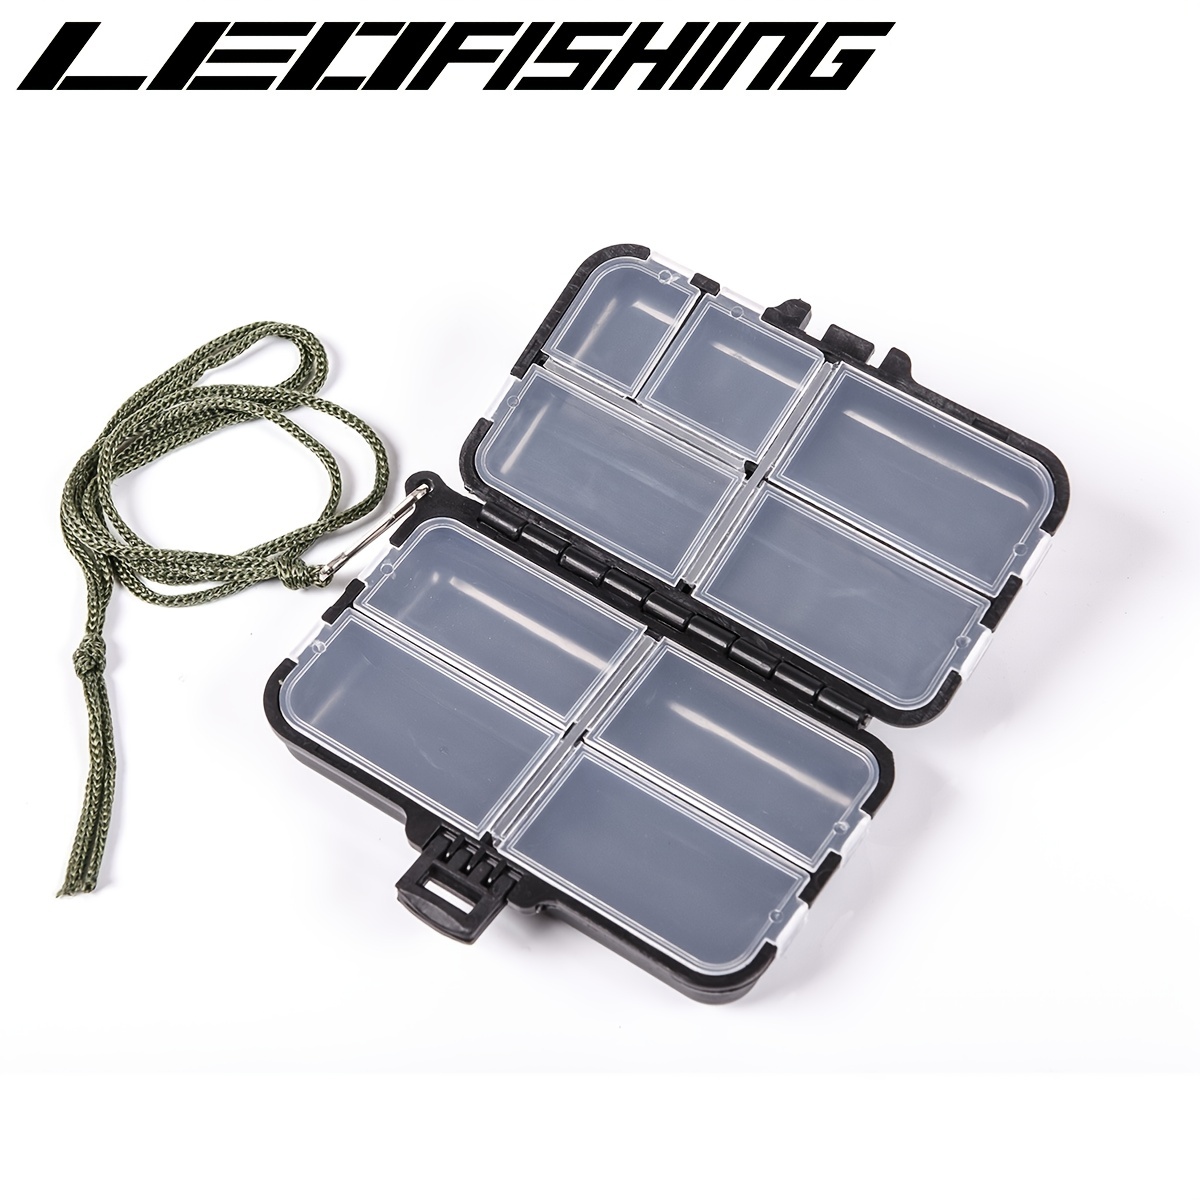 LEOFISHING Portable Fishing Box: 9 Compartments For Fishing Accessories -  Waterproof & Durable!